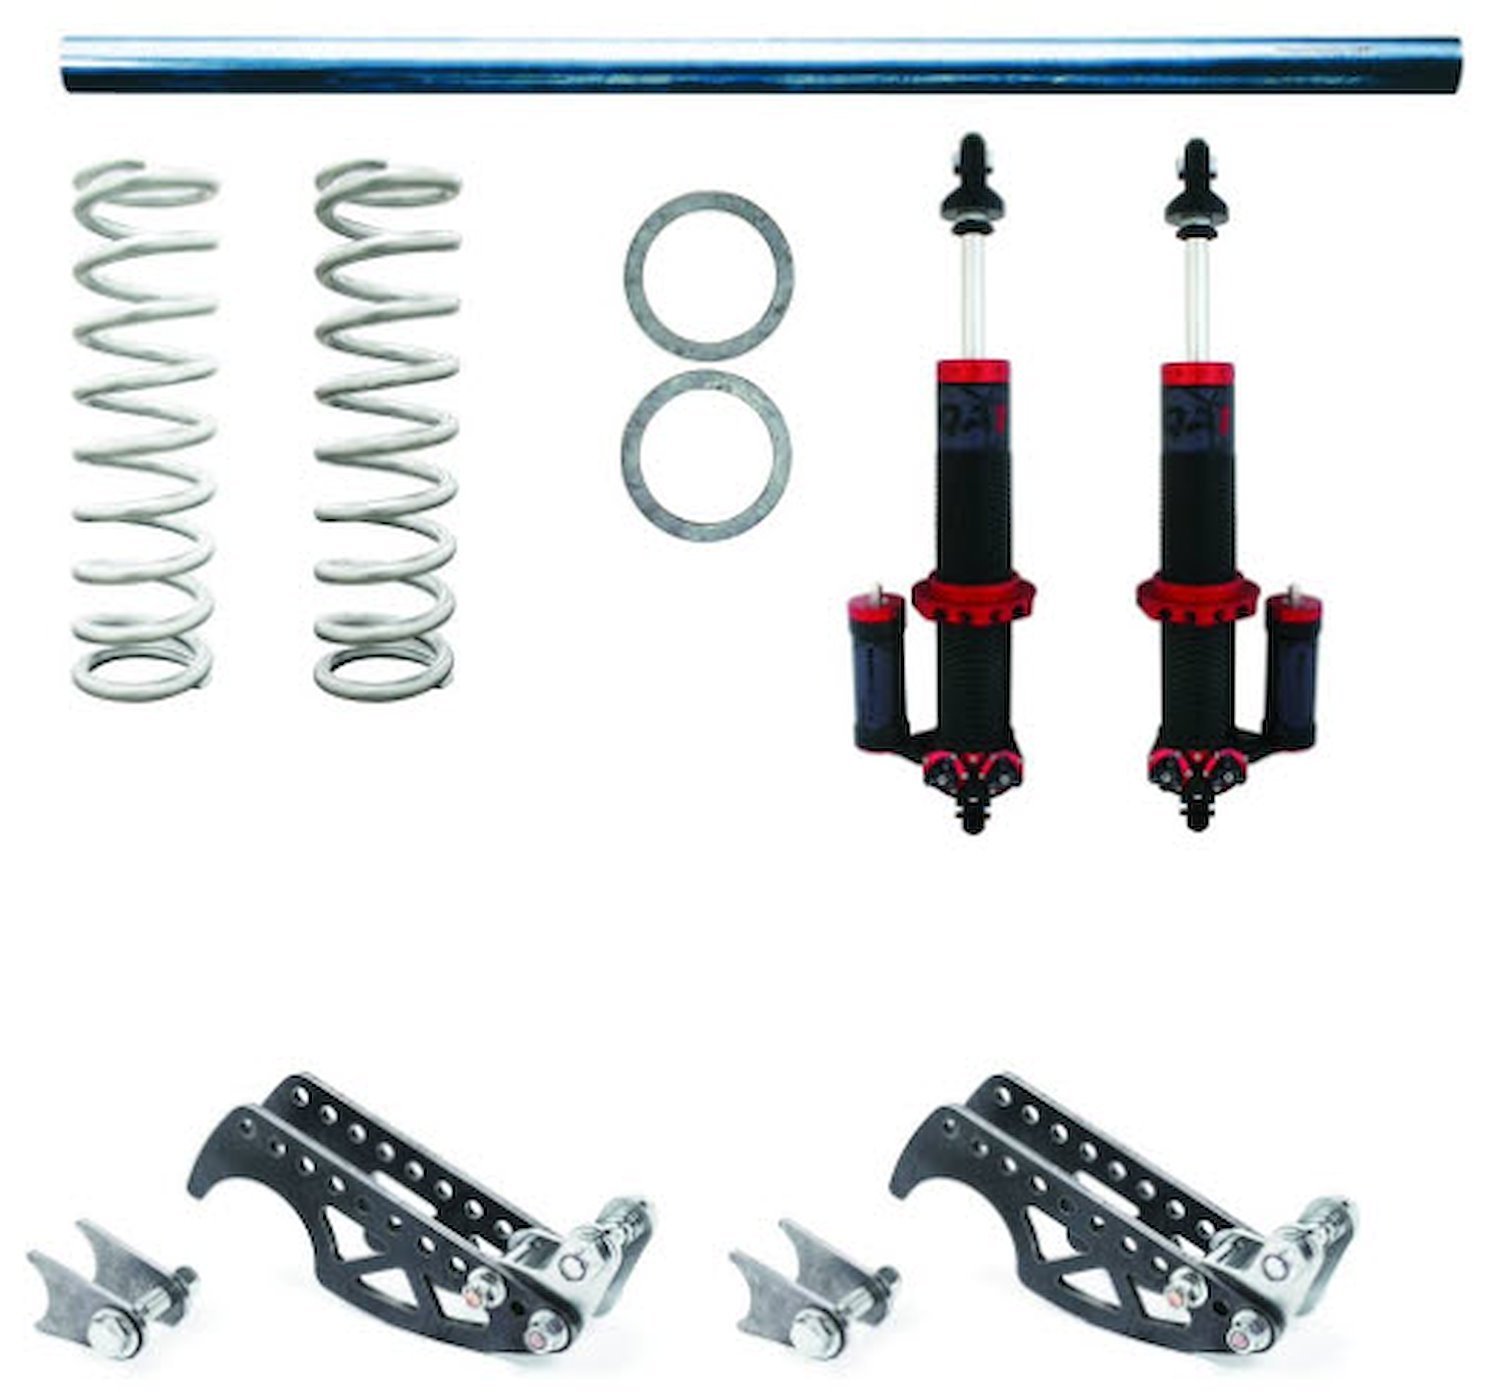 DM501-12200 Heavy-Duty Pro Rear Coil-Over Conversion System for 3 in. Axle Tubes w/MOD-Series Shocks & 200 lb. Springs